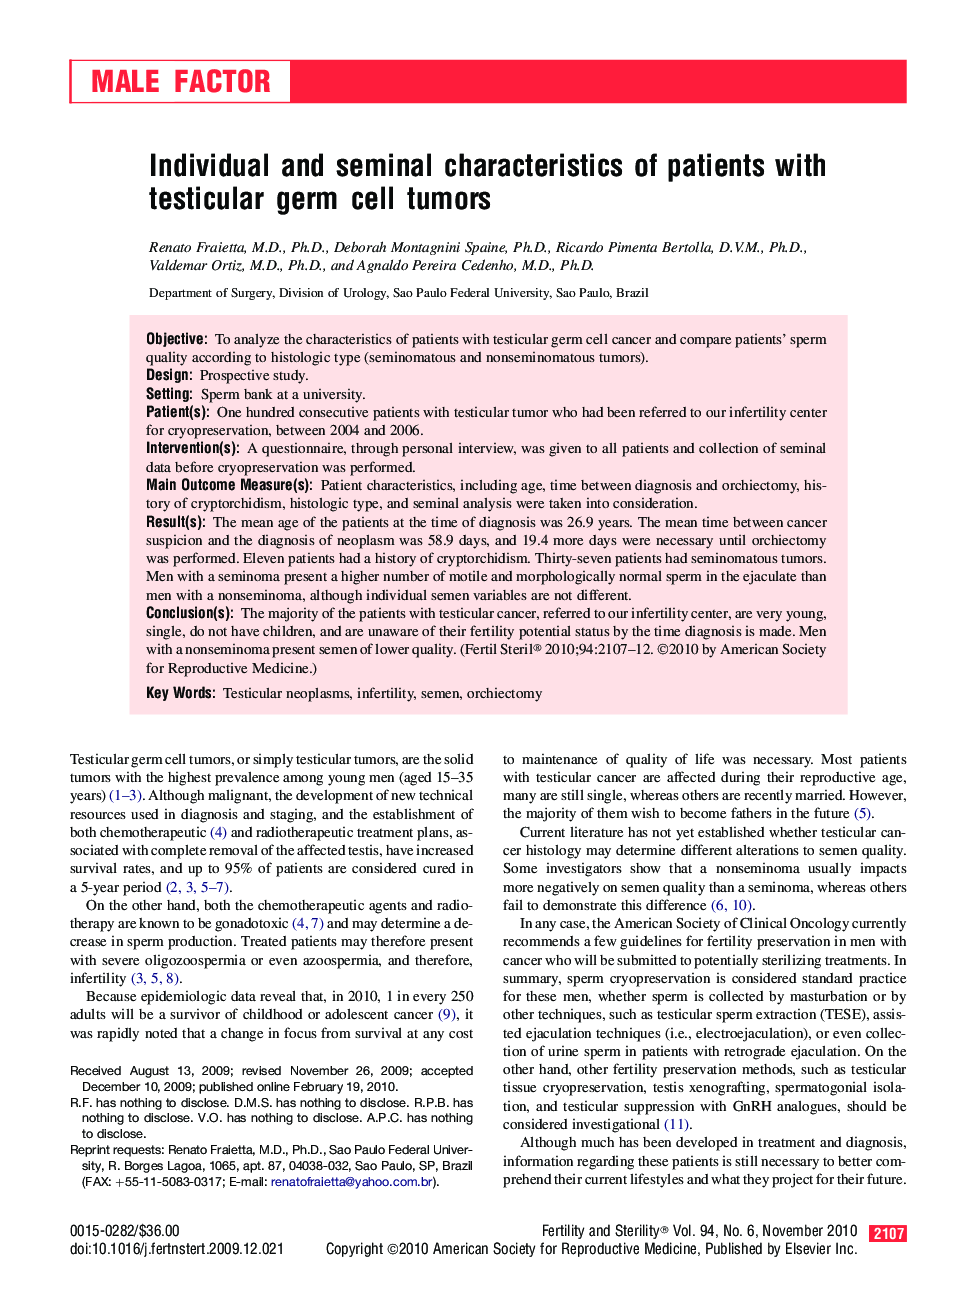 Individual and seminal characteristics of patients with testicular germ cell tumors 